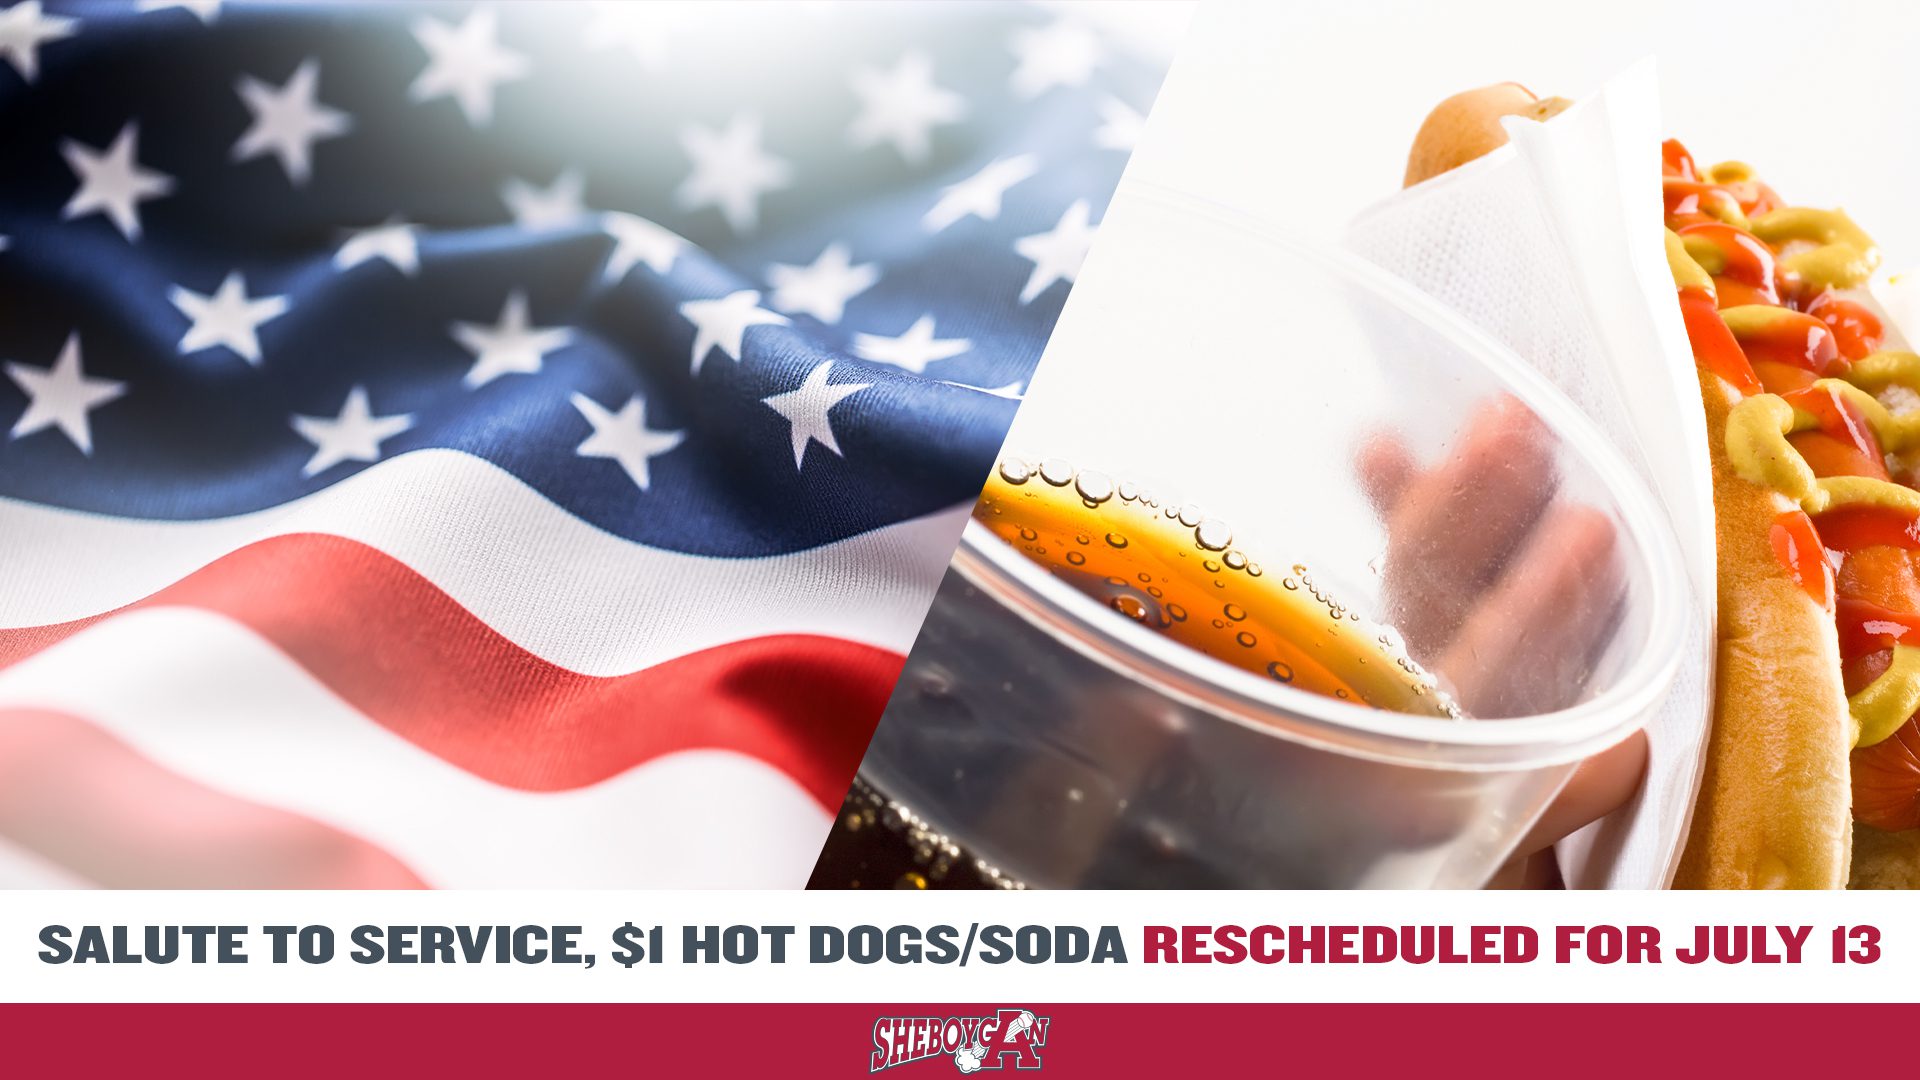 Salute to Service, $1 Hot Dogs, $1 Sodas